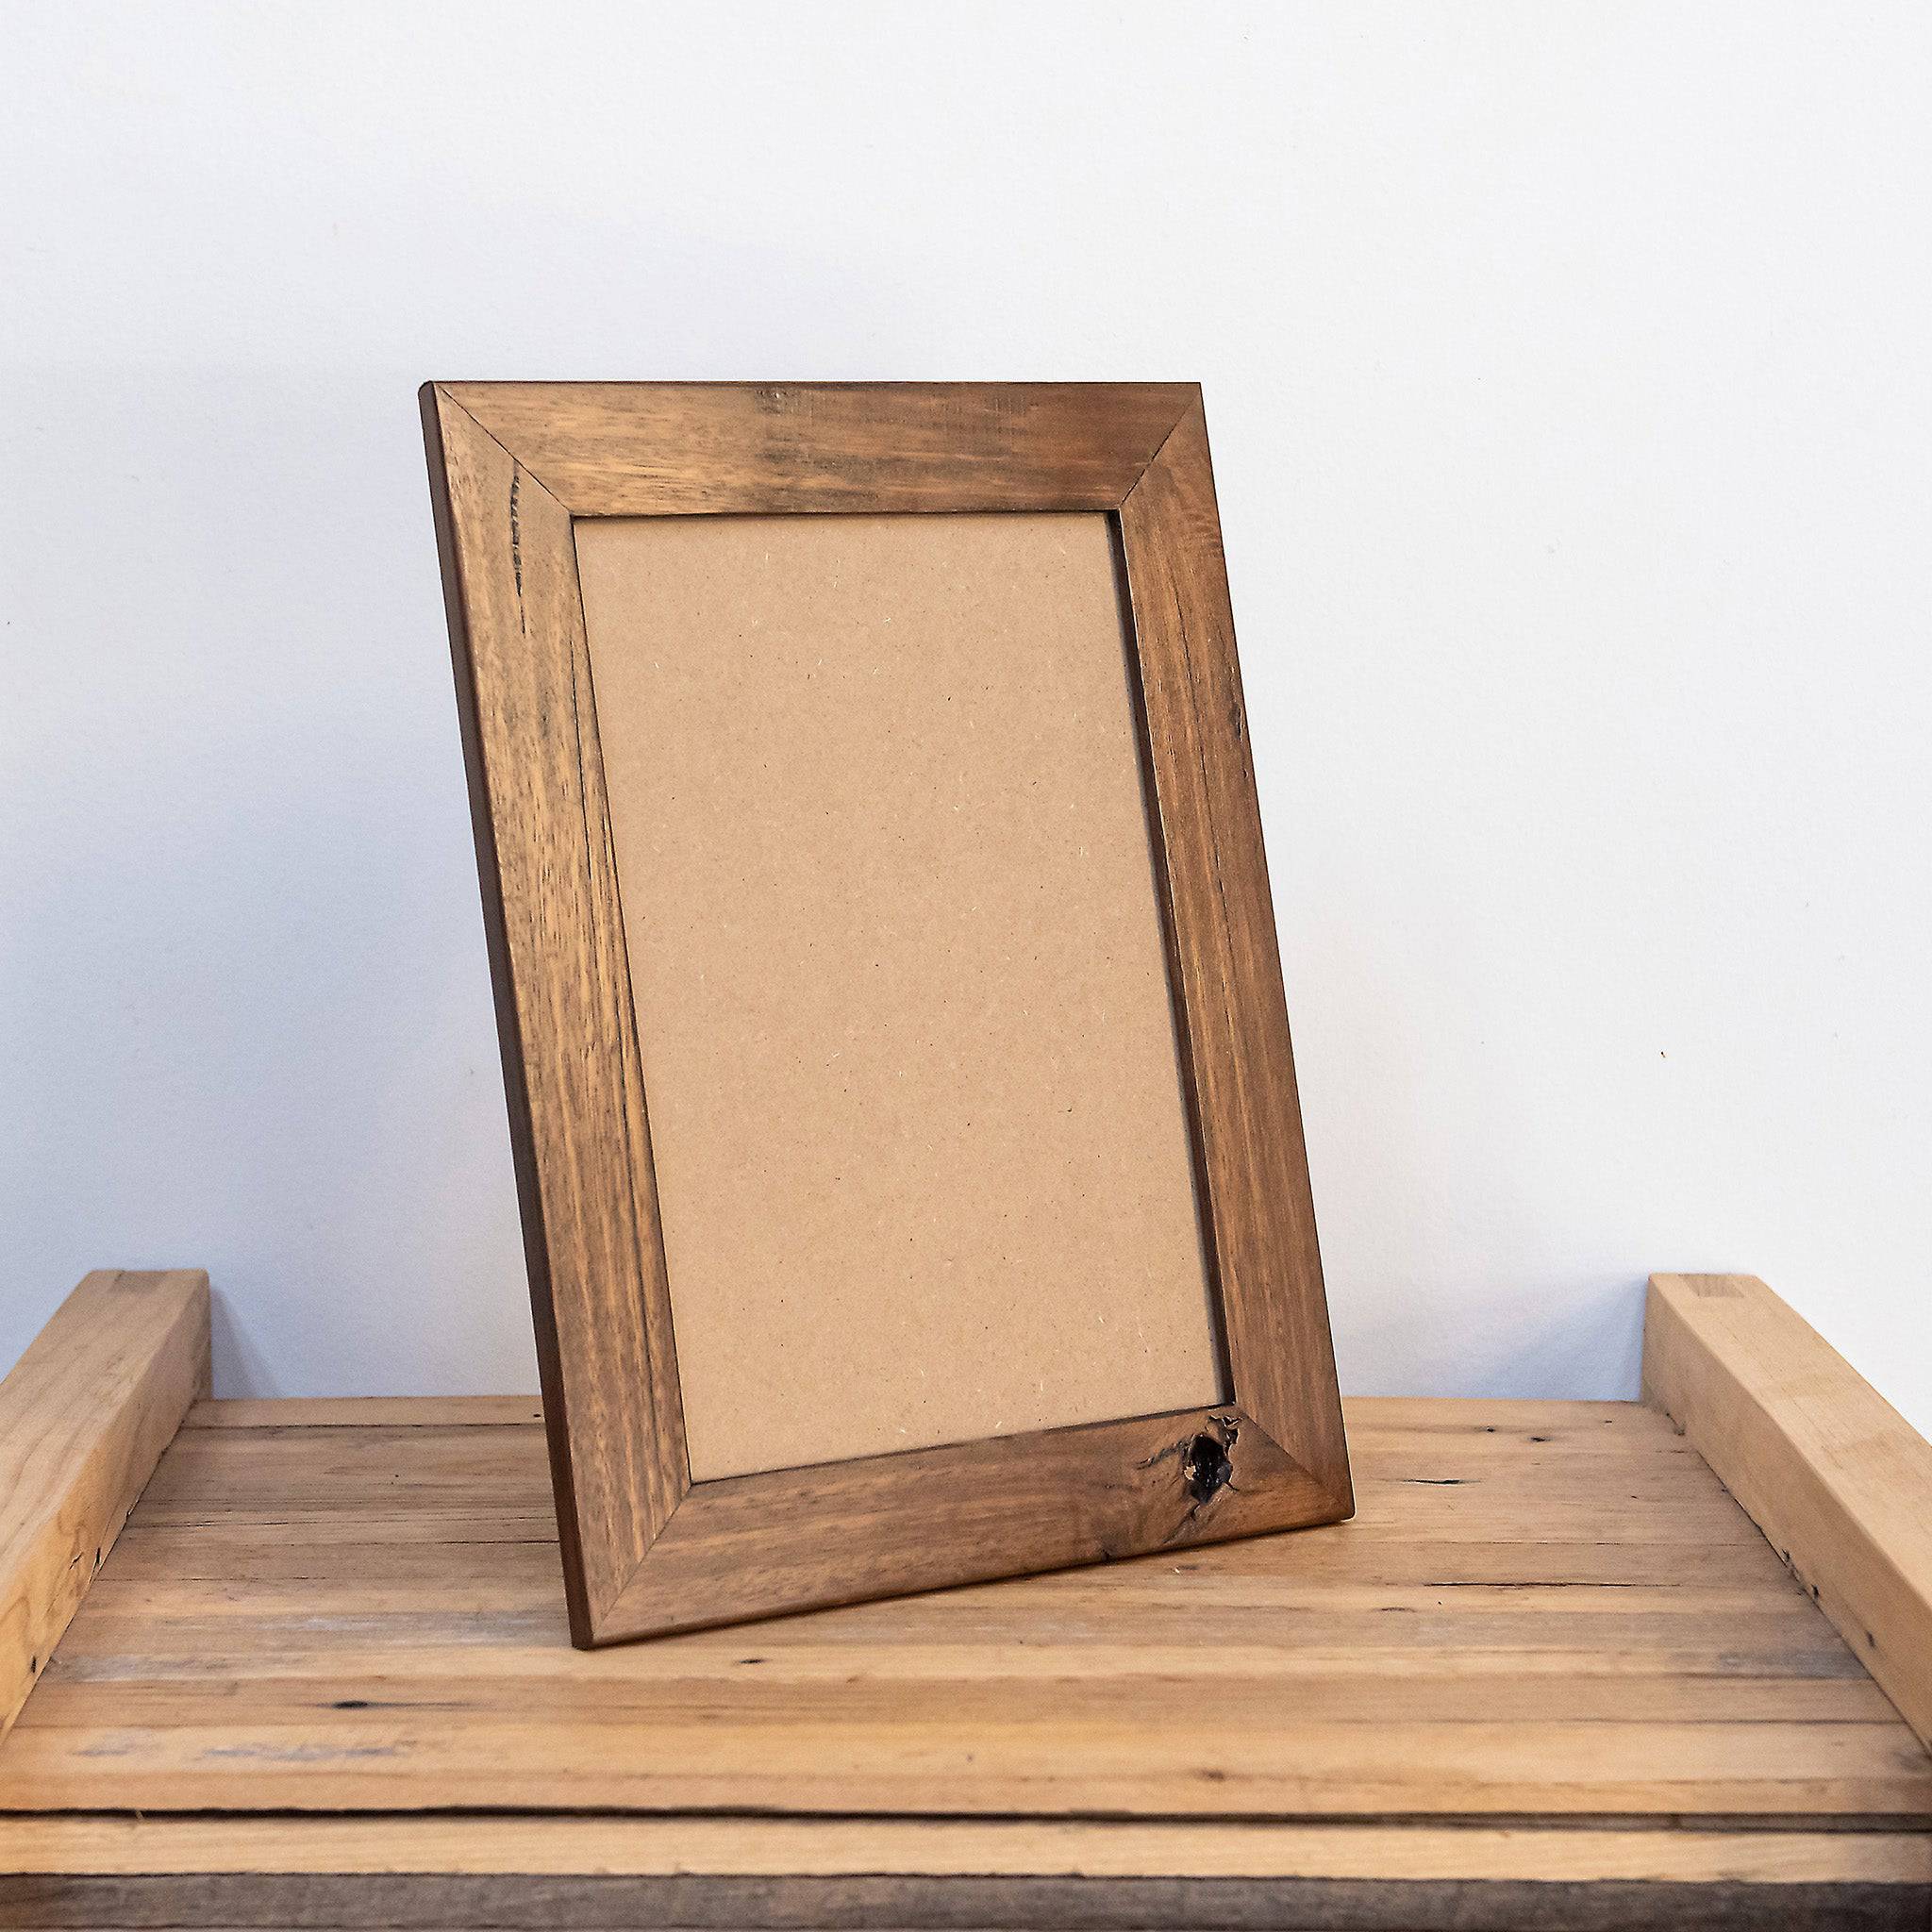 Online picture frame that can stand on a desk for A4 image. Dark wood realimed timber. 